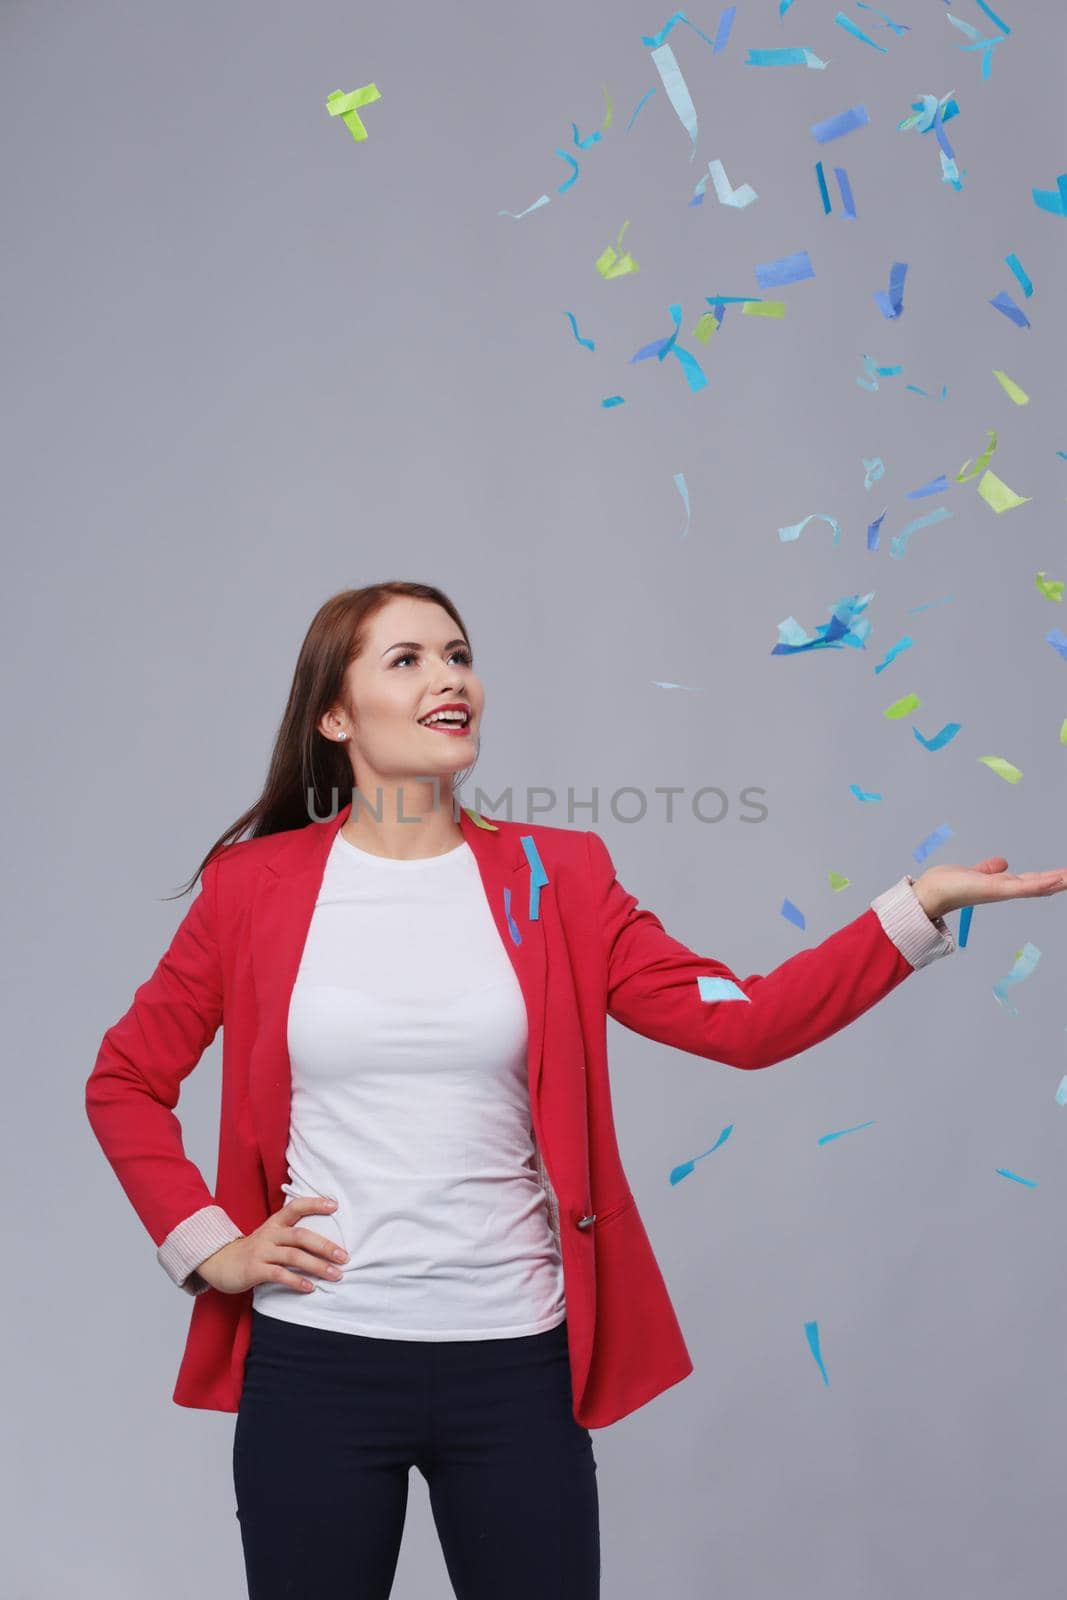 Beautiful happy woman at celebration party with confetti .Birthday or New Year eve celebrating concept